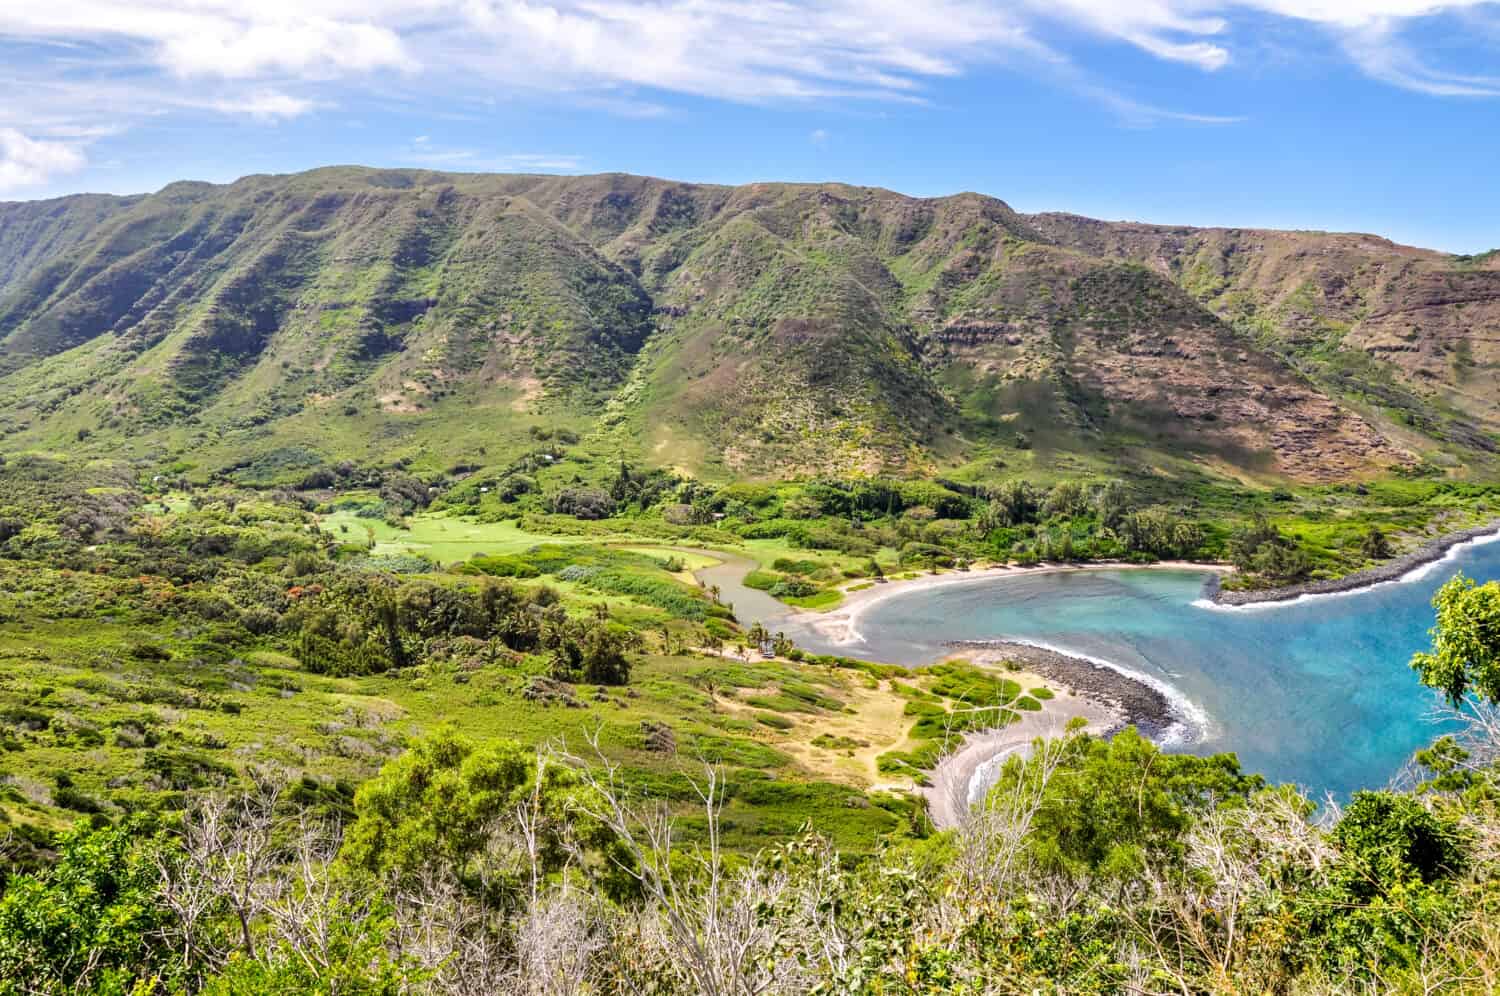 Beautiful view of Halawa Beach Park and the Halawa Valley on the remote island of Molokai (Moloka'i), Hawaii, USA.Two beaches, Kamaalaea and Kawili, are located in the bay. Popular tourist attraction.